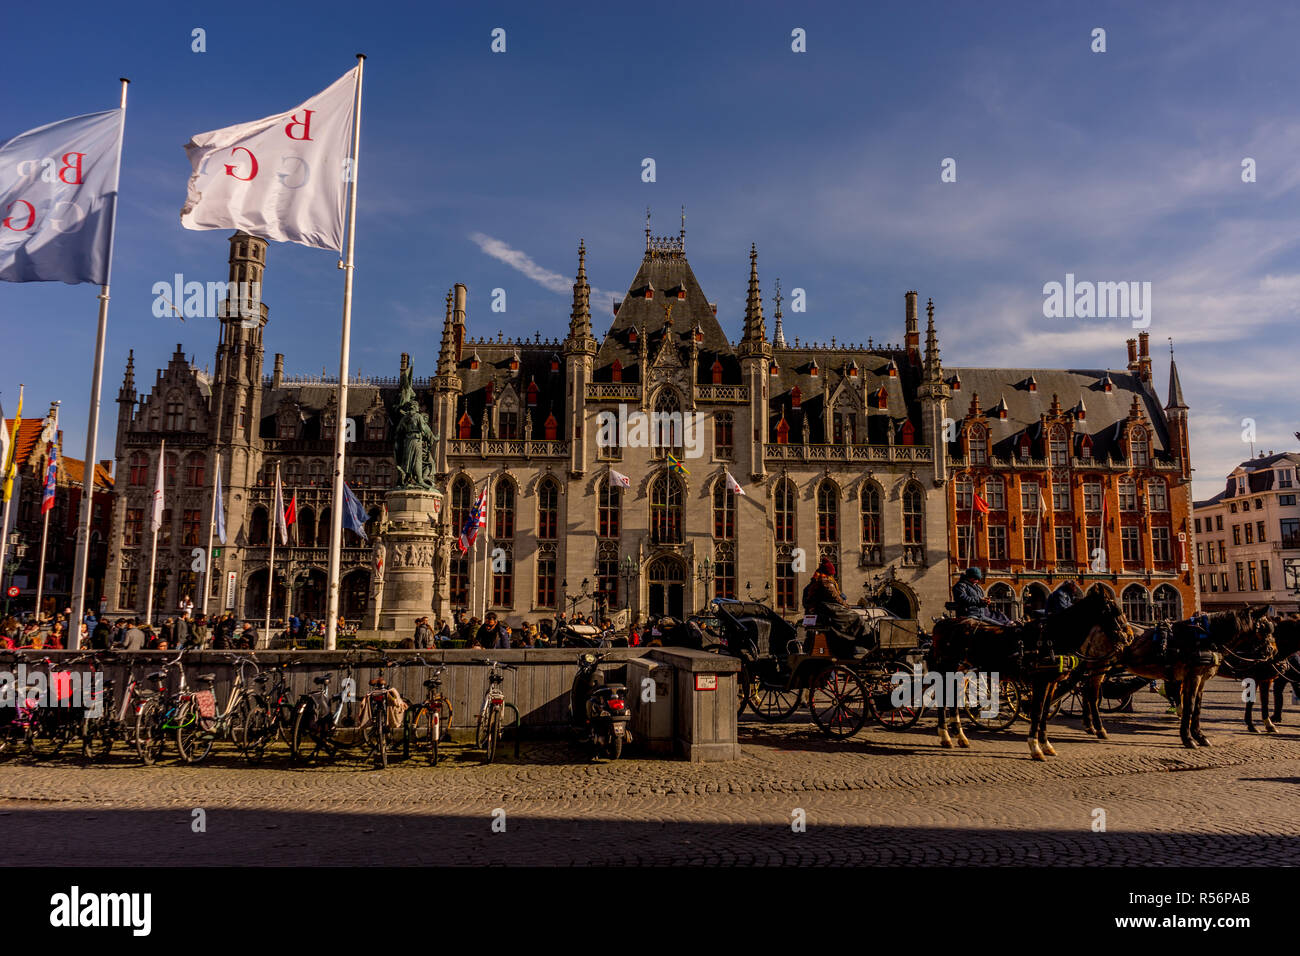 Bruges, Belgium - 17 February 2018: A horse cart is parked in front of the provincial court in Bruges, Belgium Stock Photo